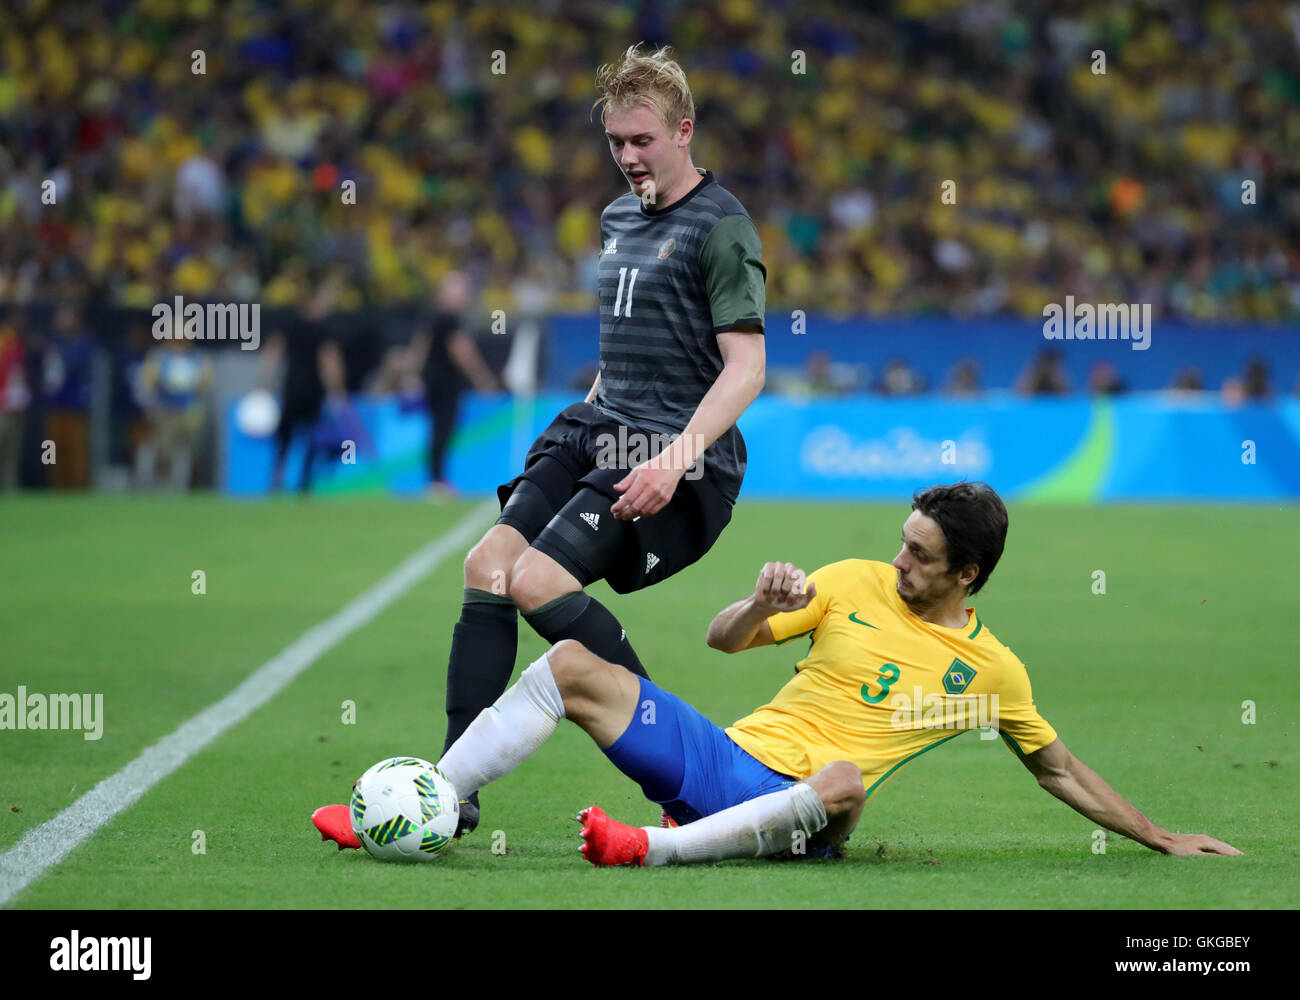 Rio de Janeiro, Brazil. 20th Aug, 2016. Julian Brandt (L) of Germany and Rodrigo Caio of Brazil vie for the ball during the Men's soccer Gold Medal Match between Brazil and Germany during the Rio 2016 Olympic Games at the Maracana in Rio de Janeiro, Brazil, 20 August 2016. Photo: Friso Gentsch/dpa/Alamy Live News Stock Photo